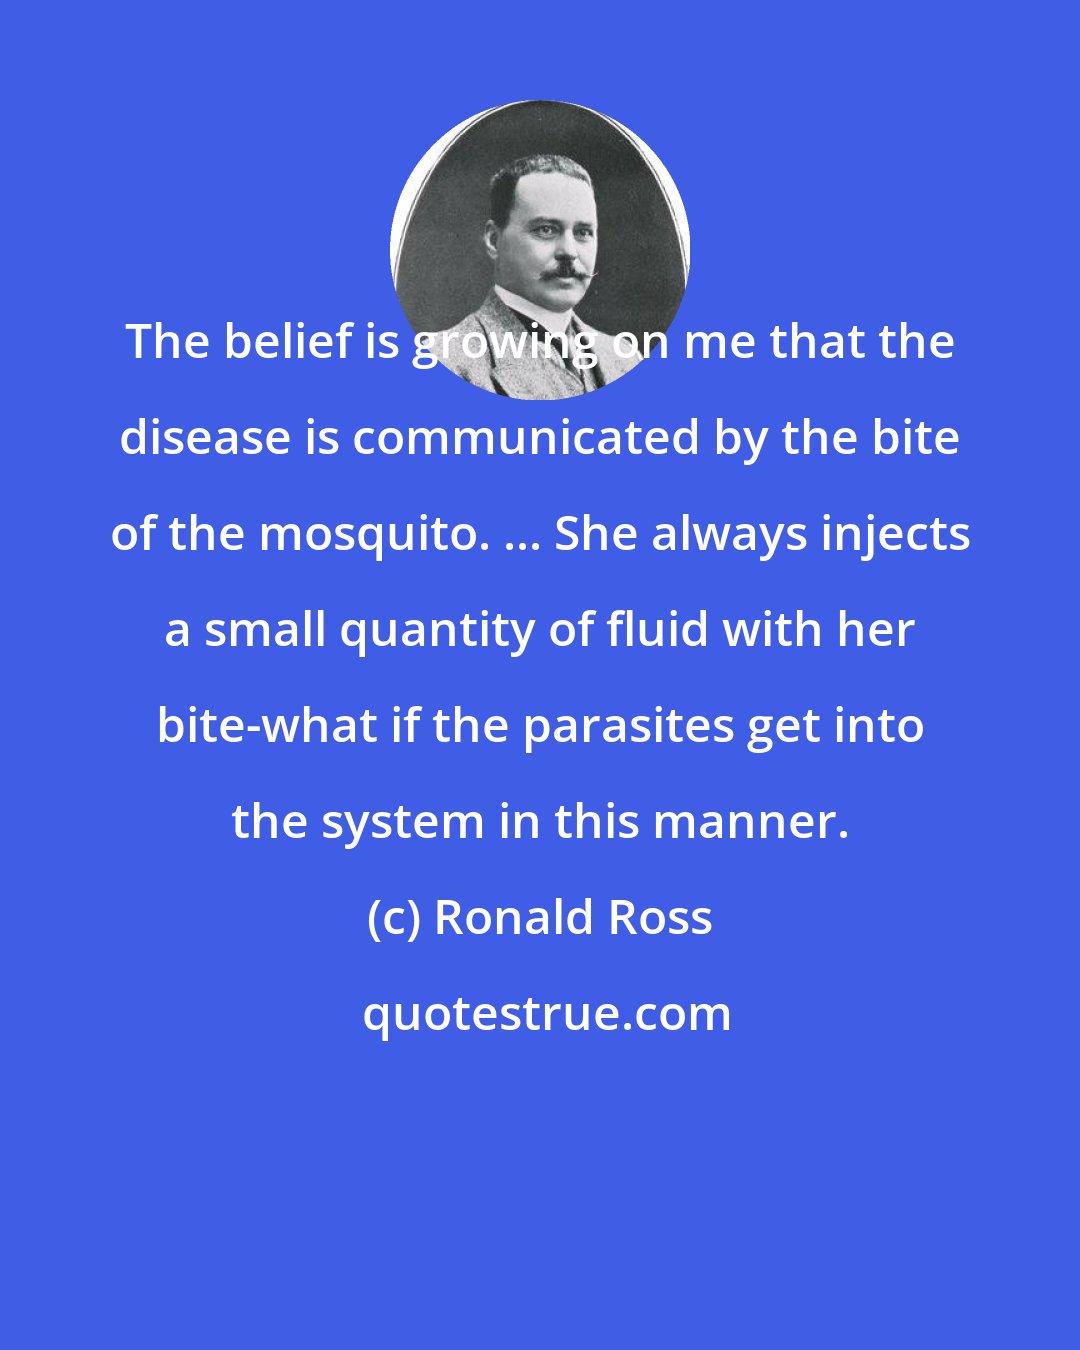 Ronald Ross: The belief is growing on me that the disease is communicated by the bite of the mosquito. ... She always injects a small quantity of fluid with her bite-what if the parasites get into the system in this manner.